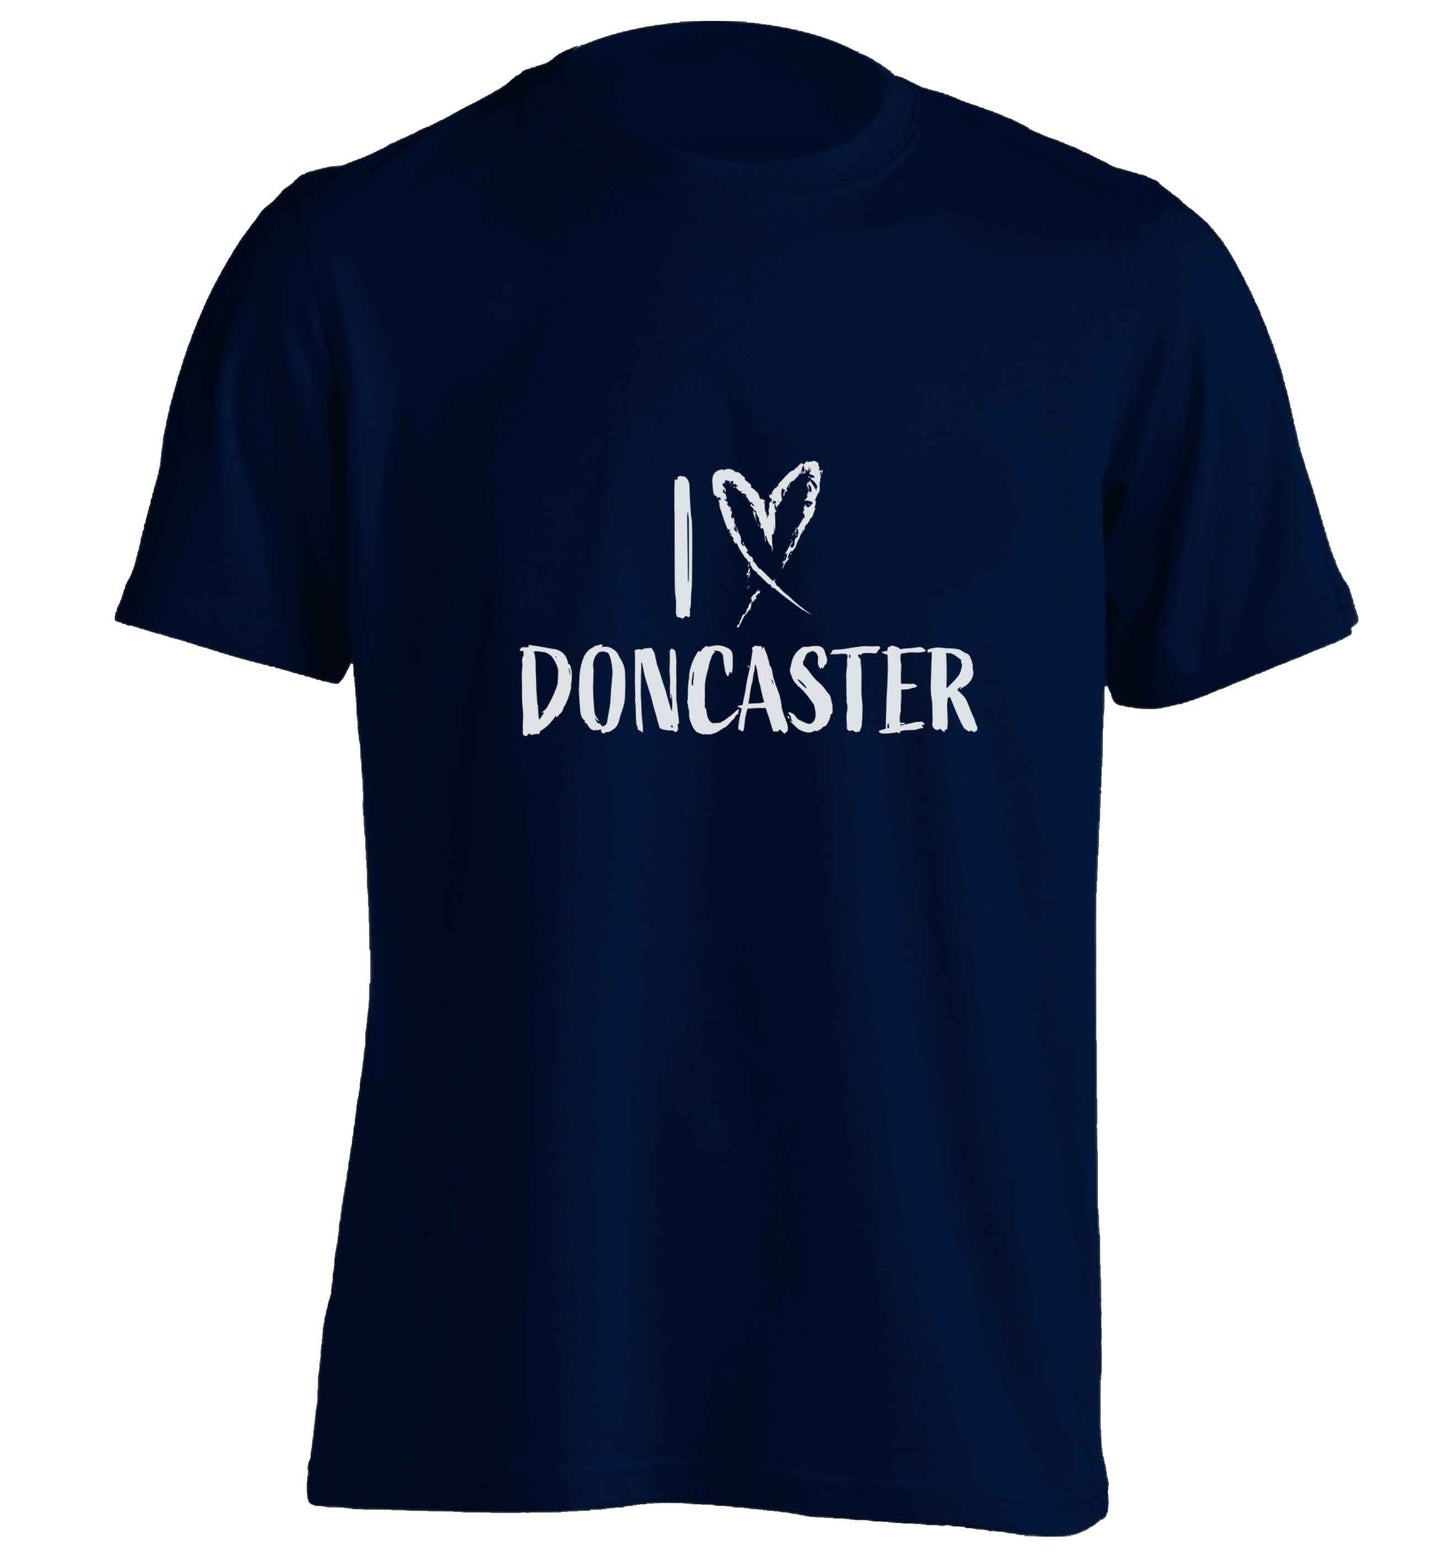 I love Doncaster adults unisex navy Tshirt 2XL